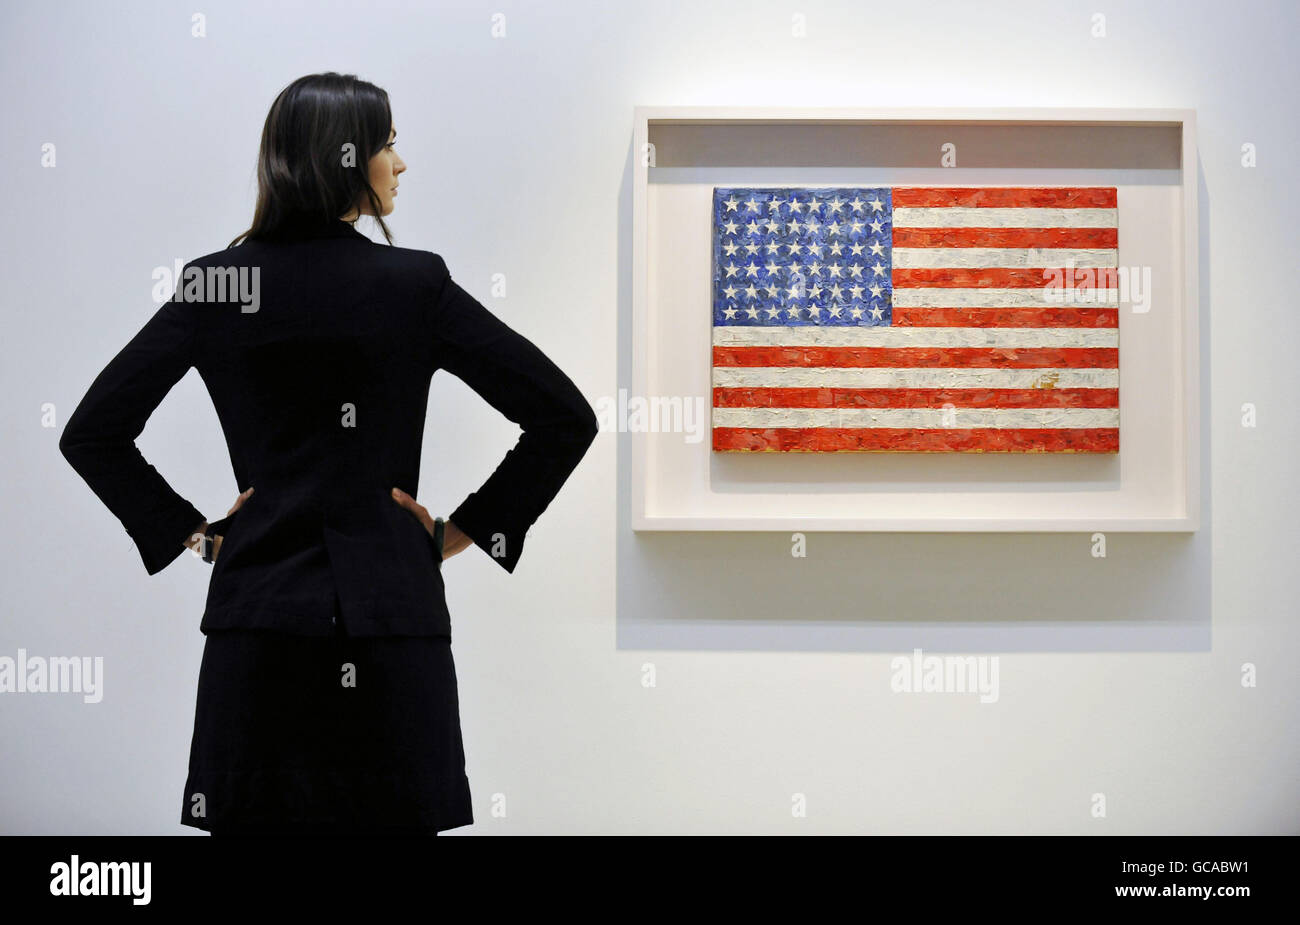 A Christie's employee poses with Jasper Johns' Flag, 1960-66, which is part of the collection of Michael Crichton on display at Christie's in London ahead of its auction on May 11. Stock Photo